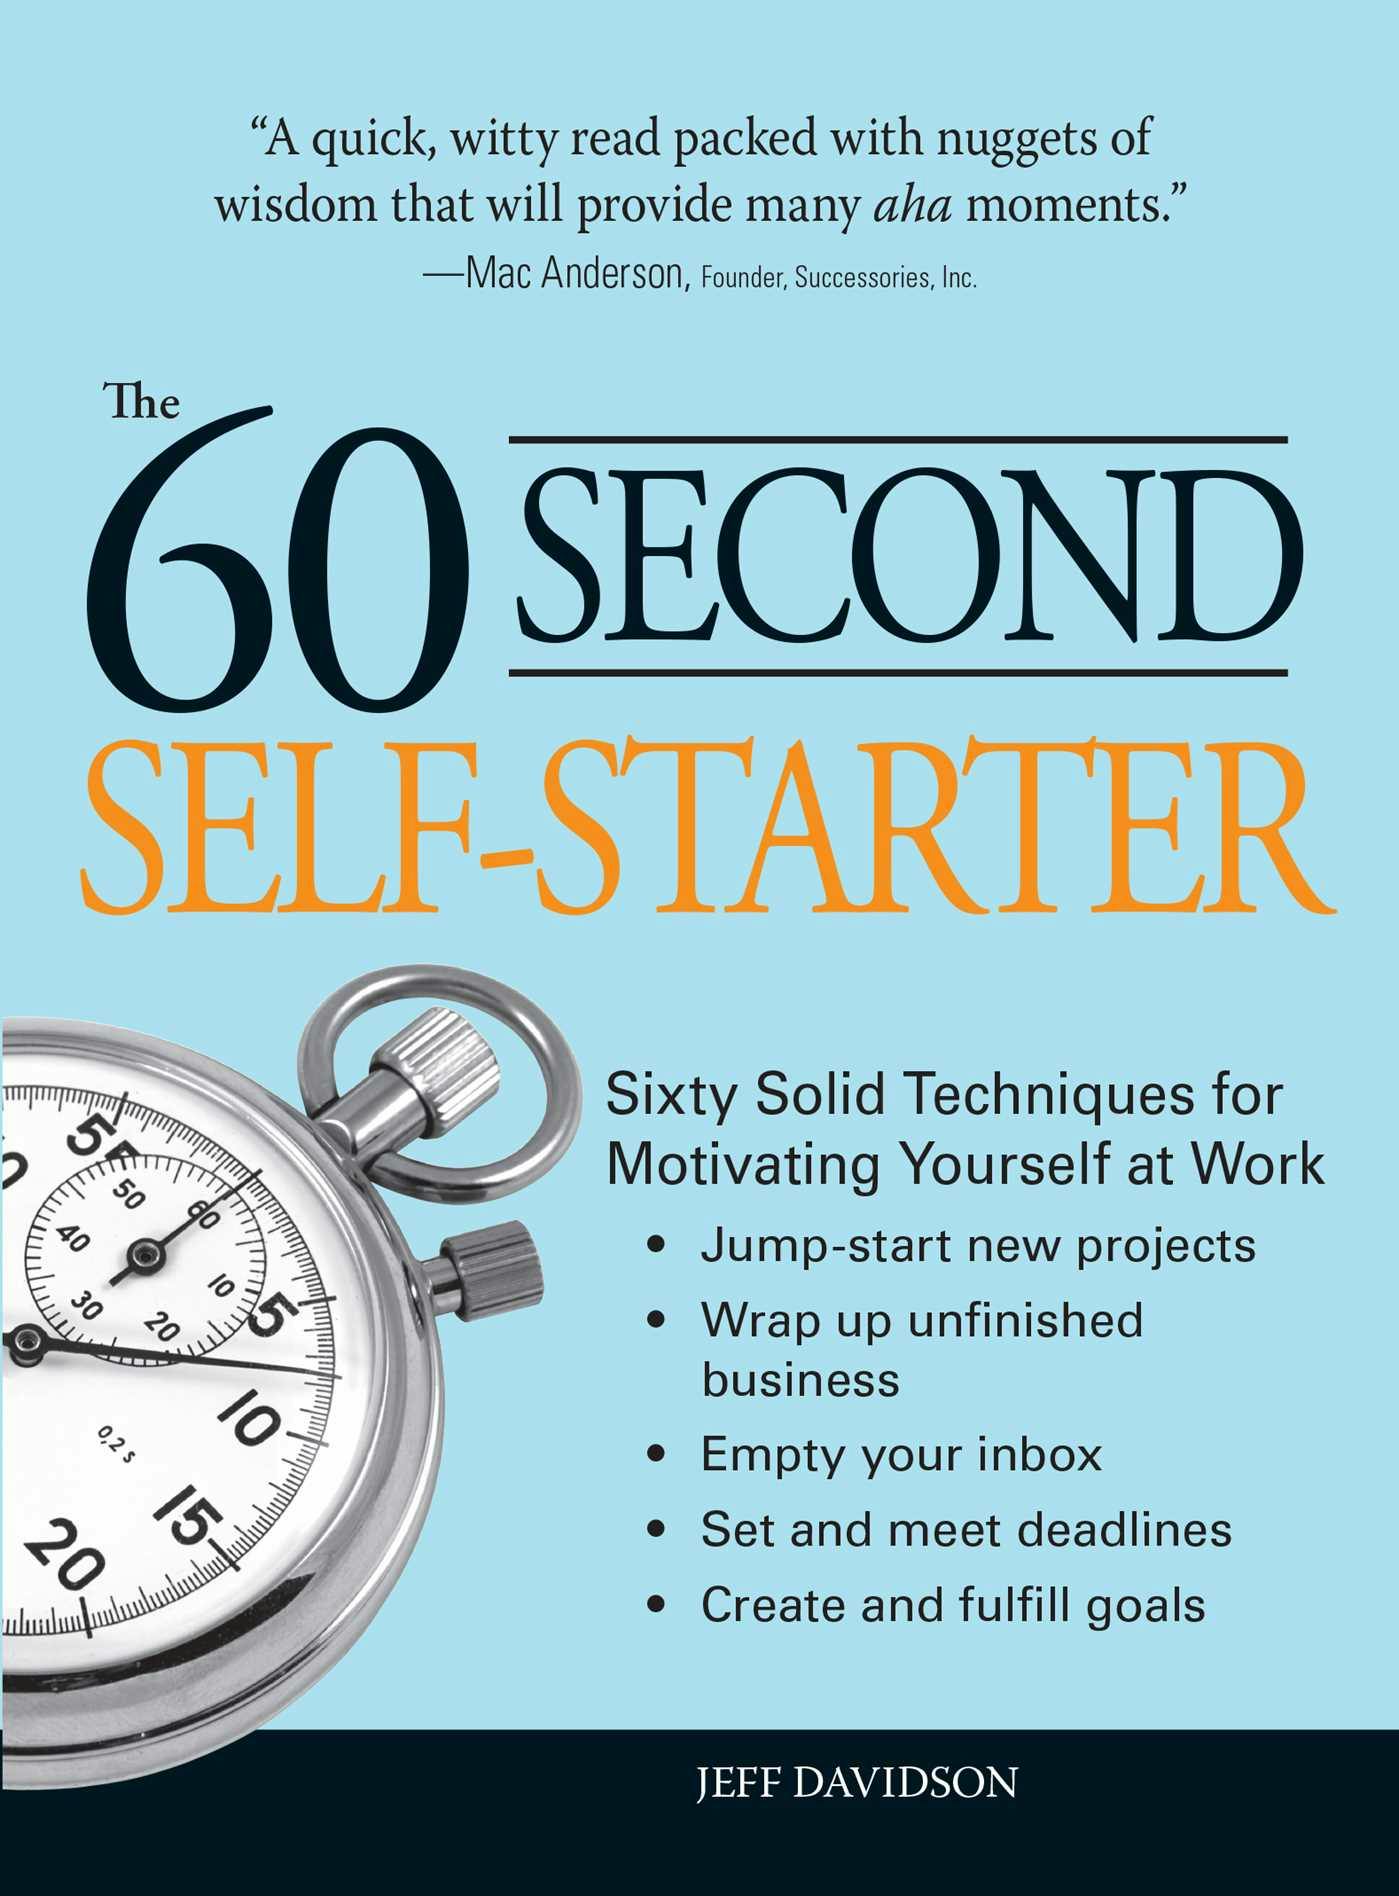 60 Second Self-Starter: Sixty Solid Techniques to get motivated, get organized, and get going in the workplace. - Jeff Davidson